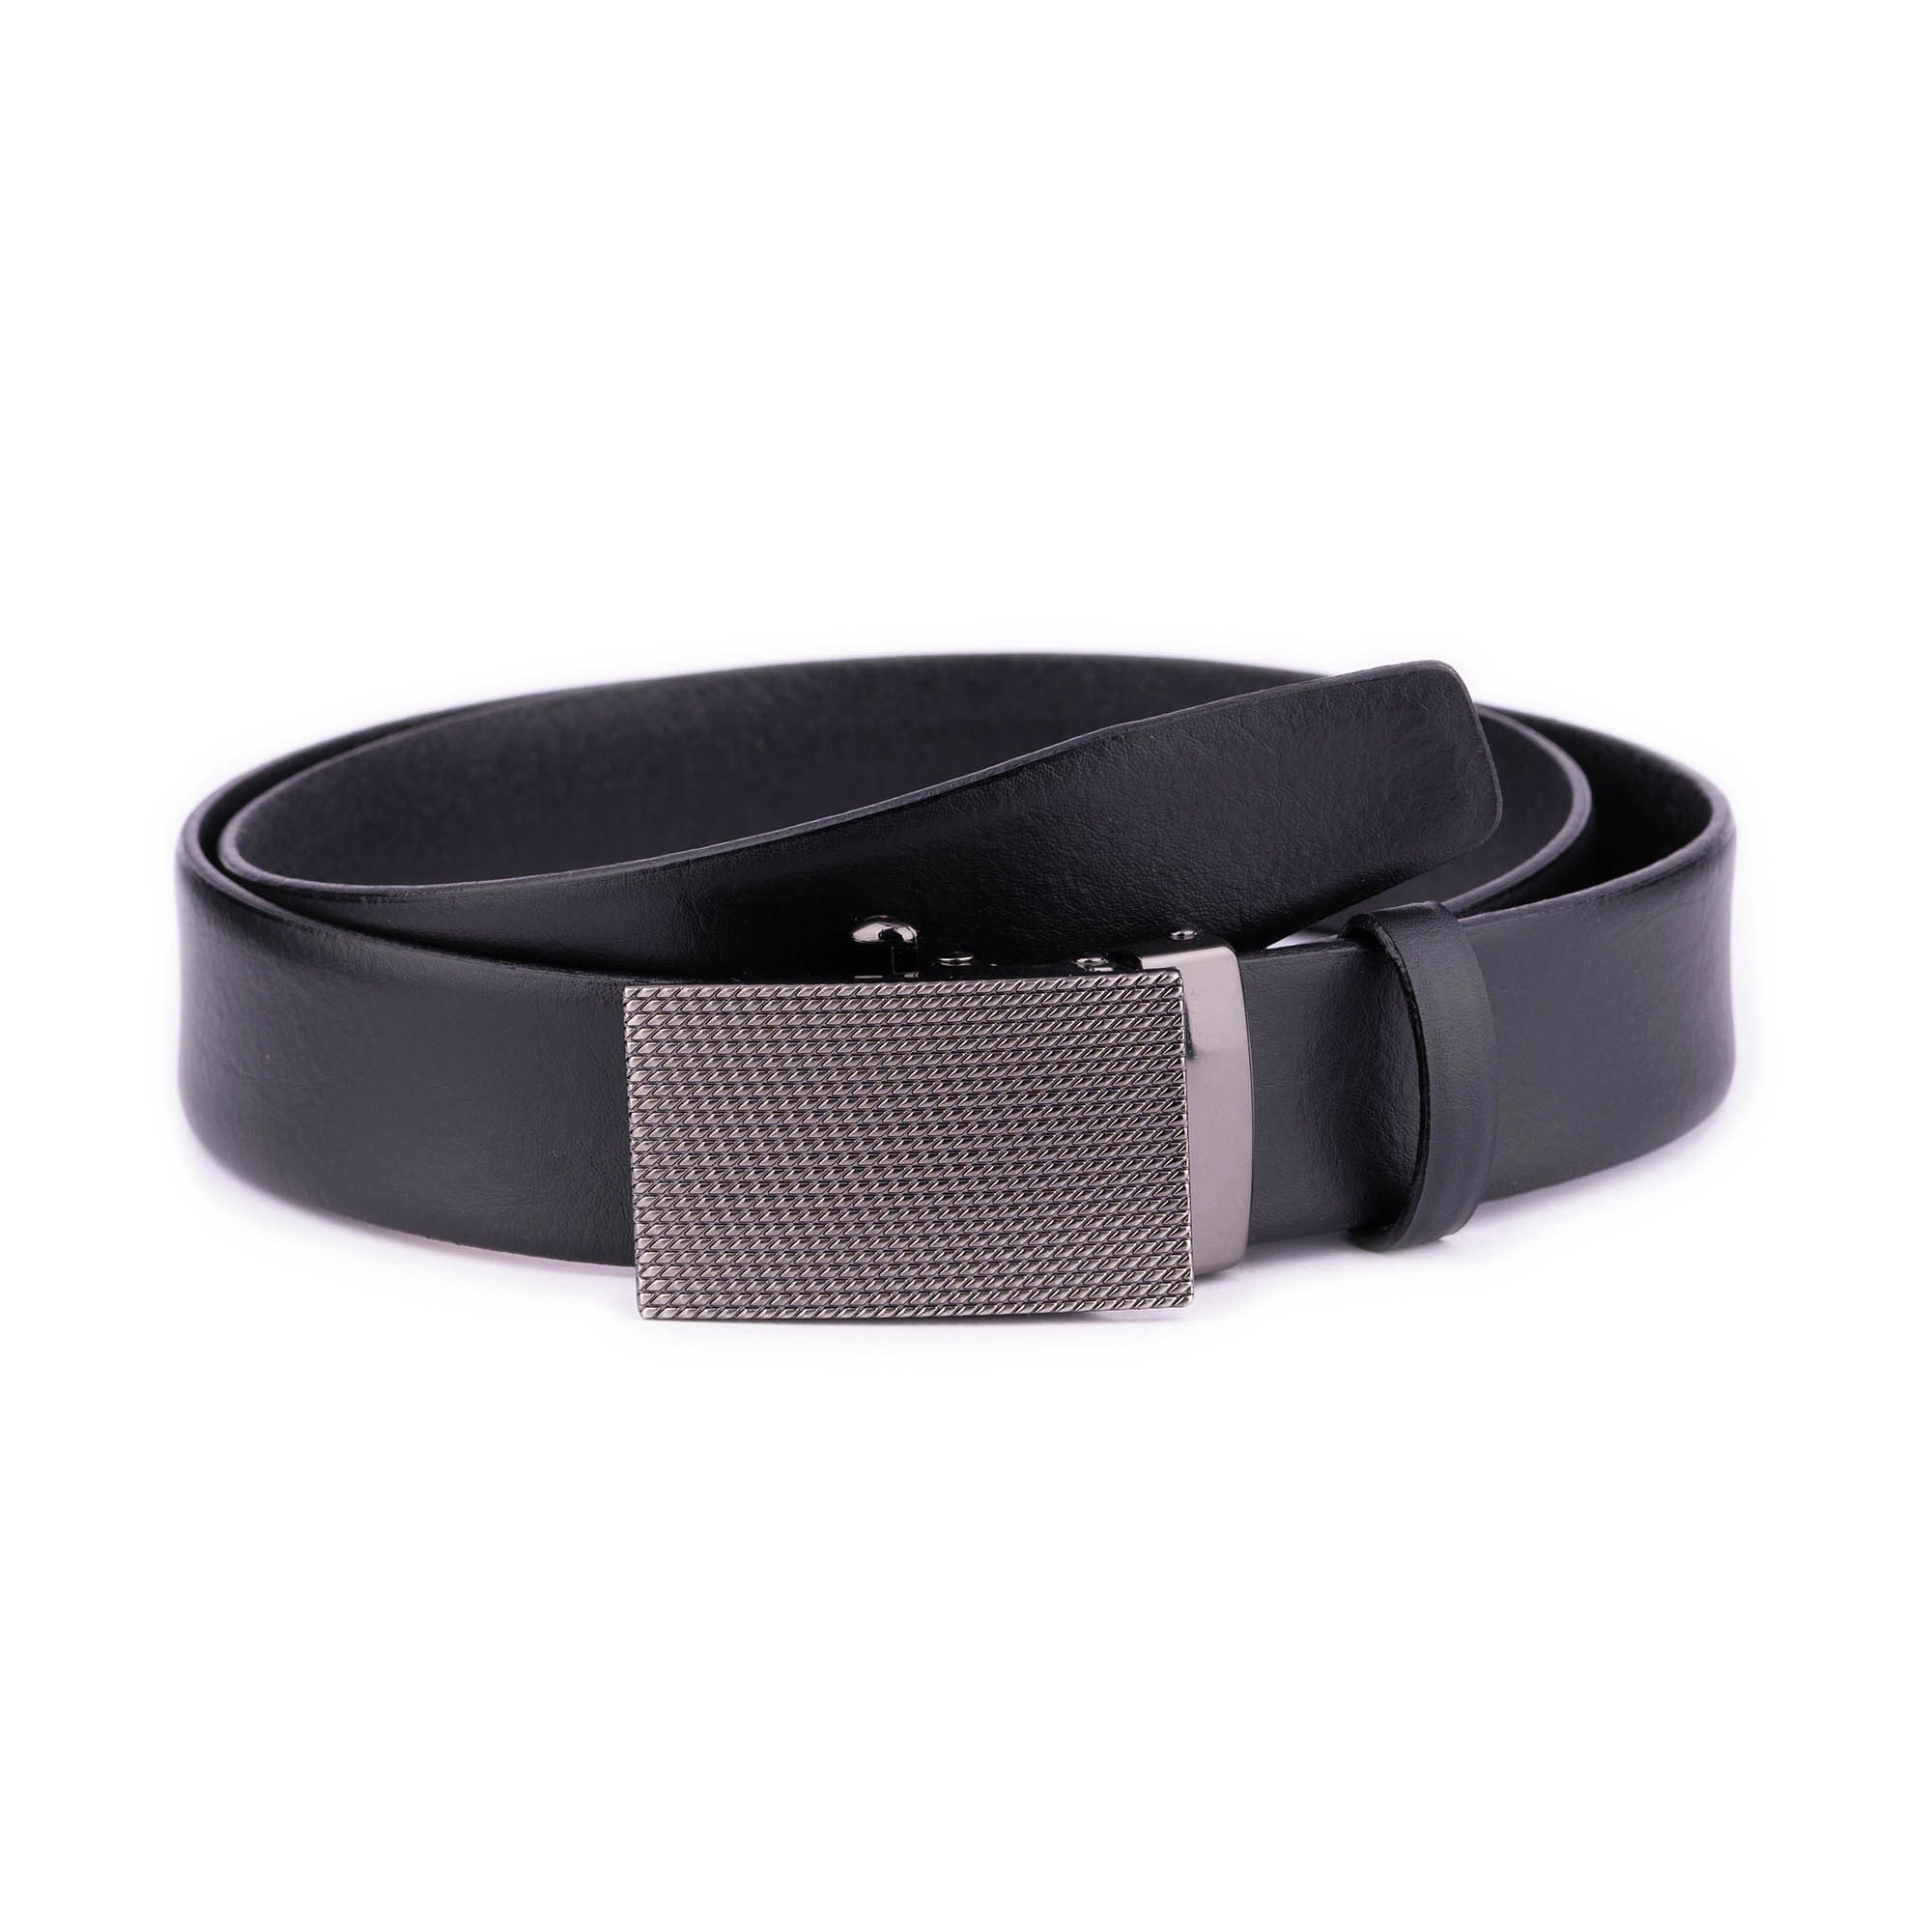 Buy Black Leather Automatic Belt With Silent Slide Buckle ...